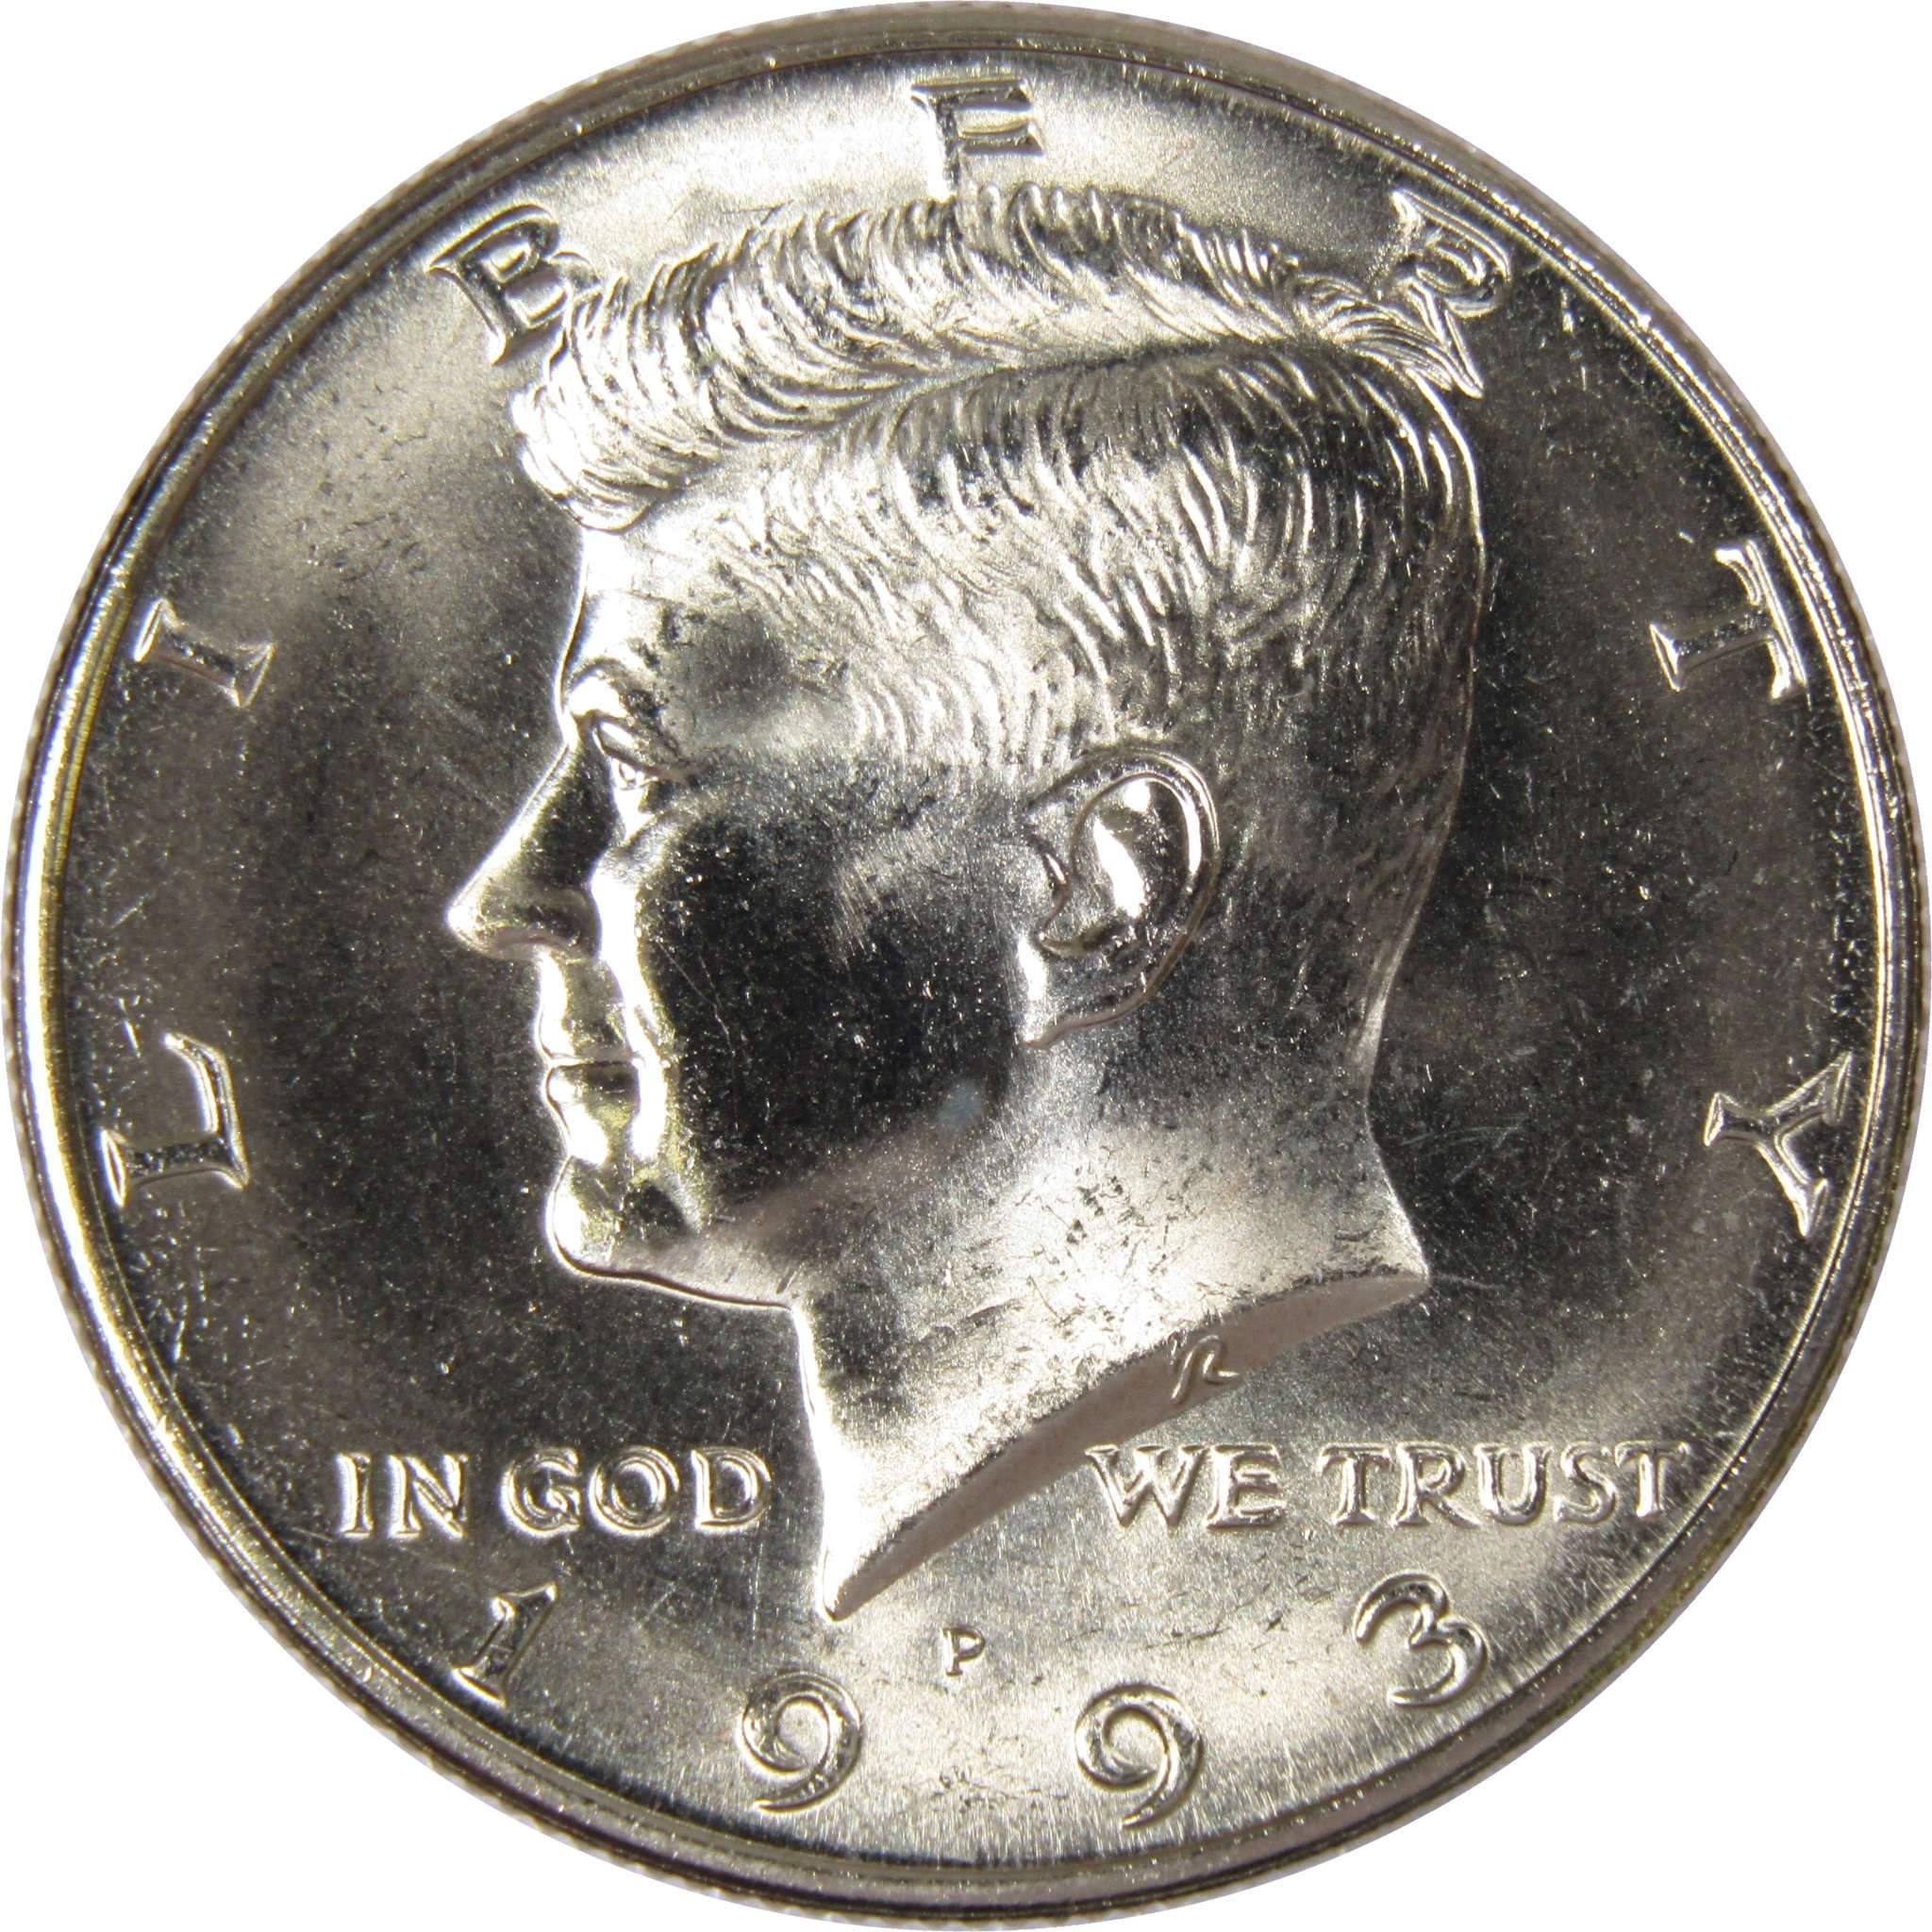 1993 P Kennedy Half Dollar BU Uncirculated Mint State 50c US Coin Collectible